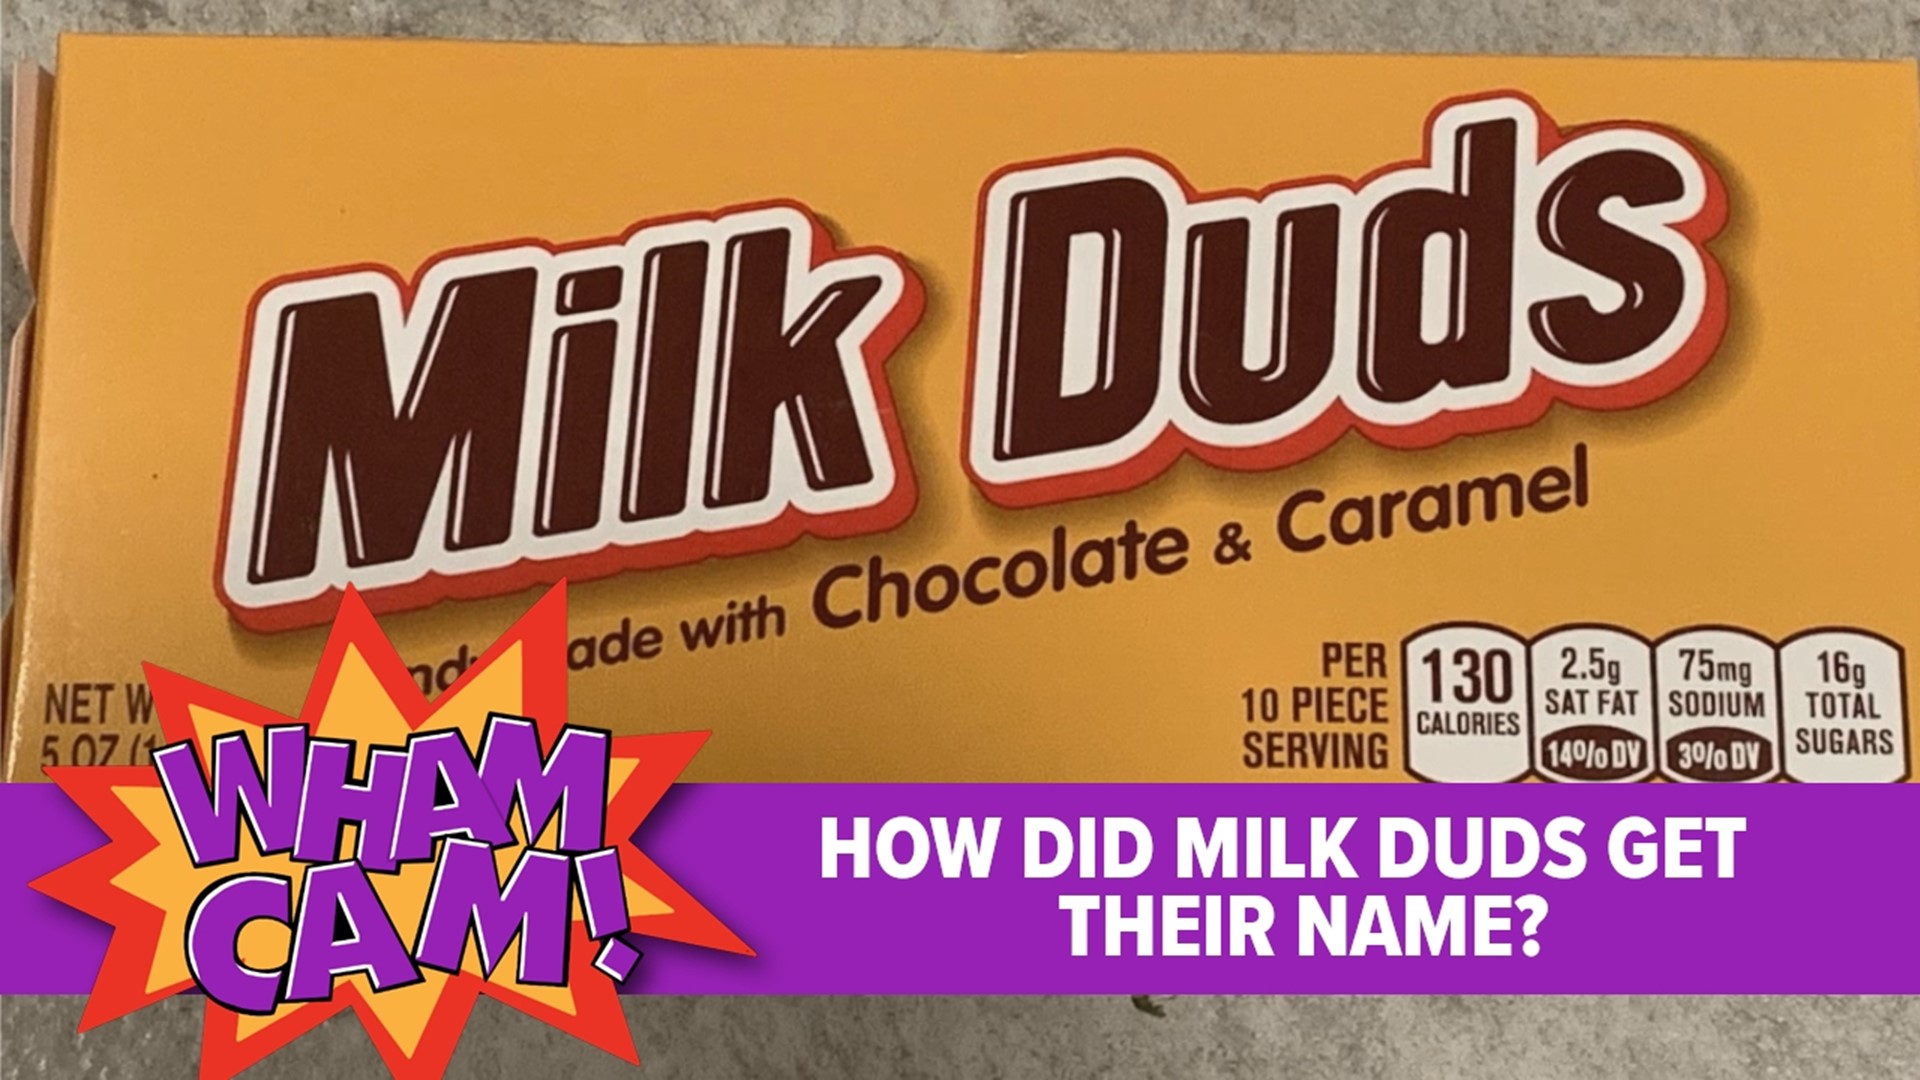 Halloween is coming, and it's time to stock up on candy, including Milk Duds. Ever wonder how the candy got its name? Find out in this week's Wham Cam.